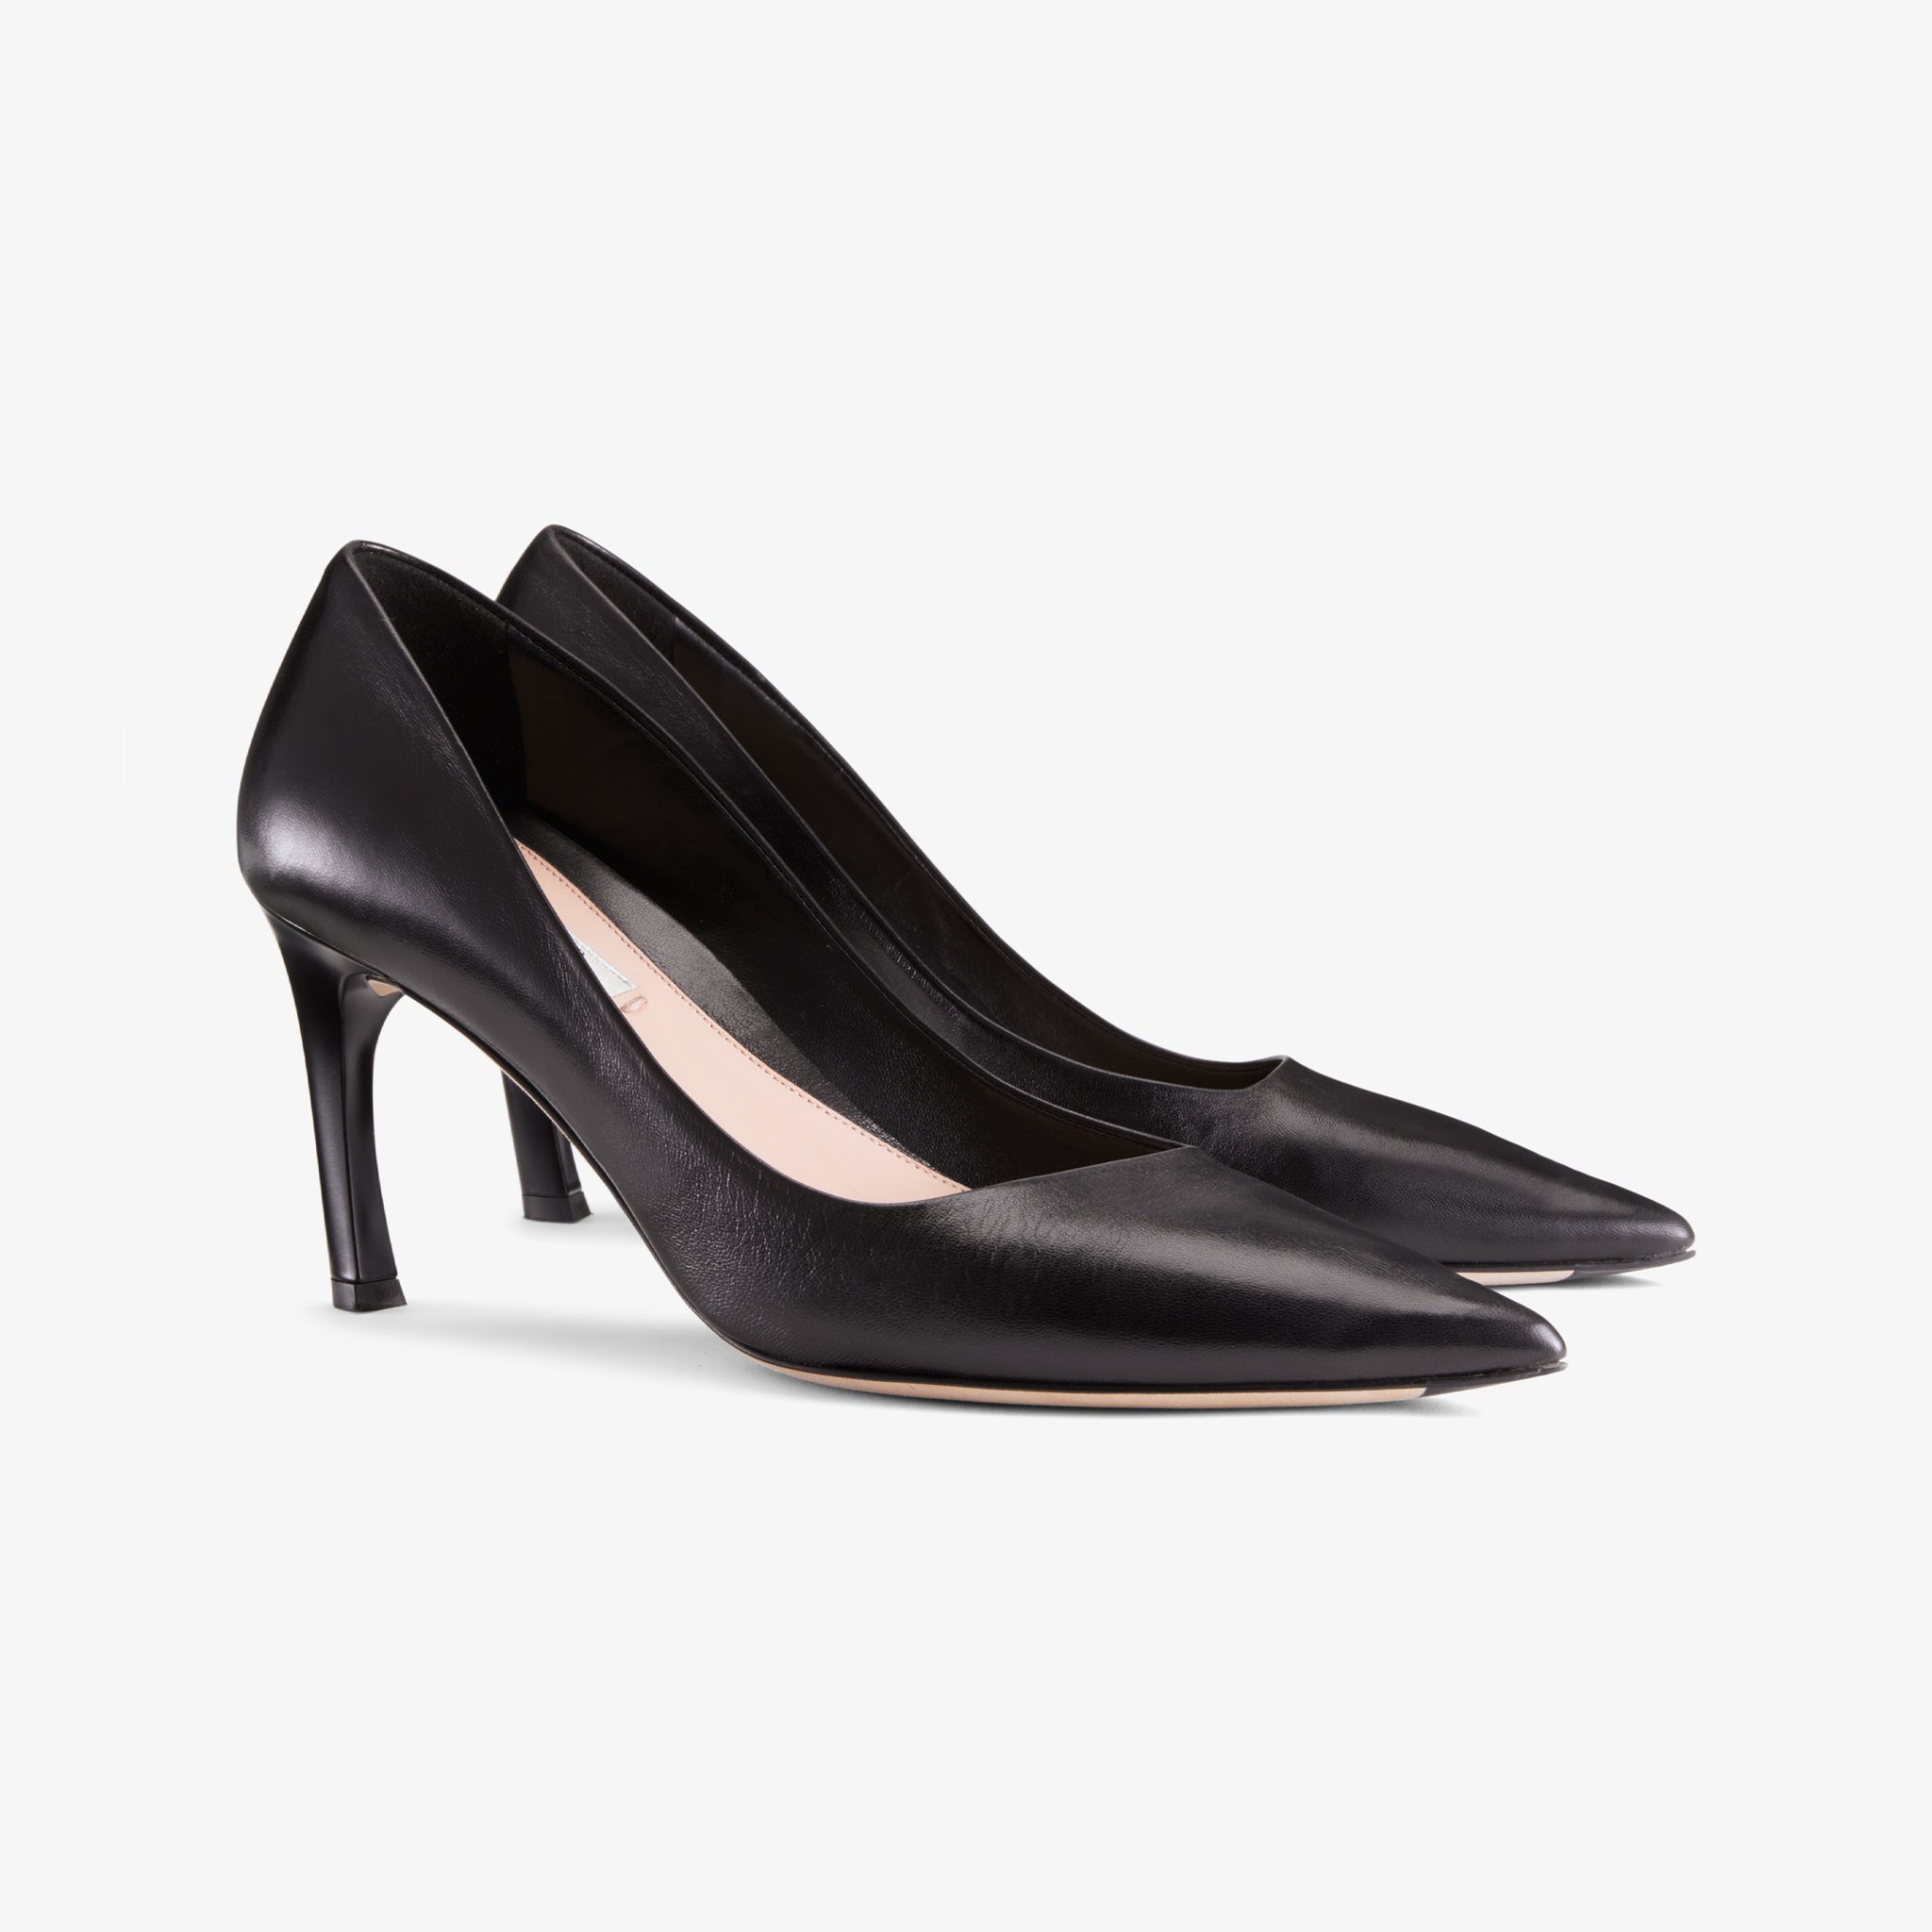 still image of the ginger pump in black 